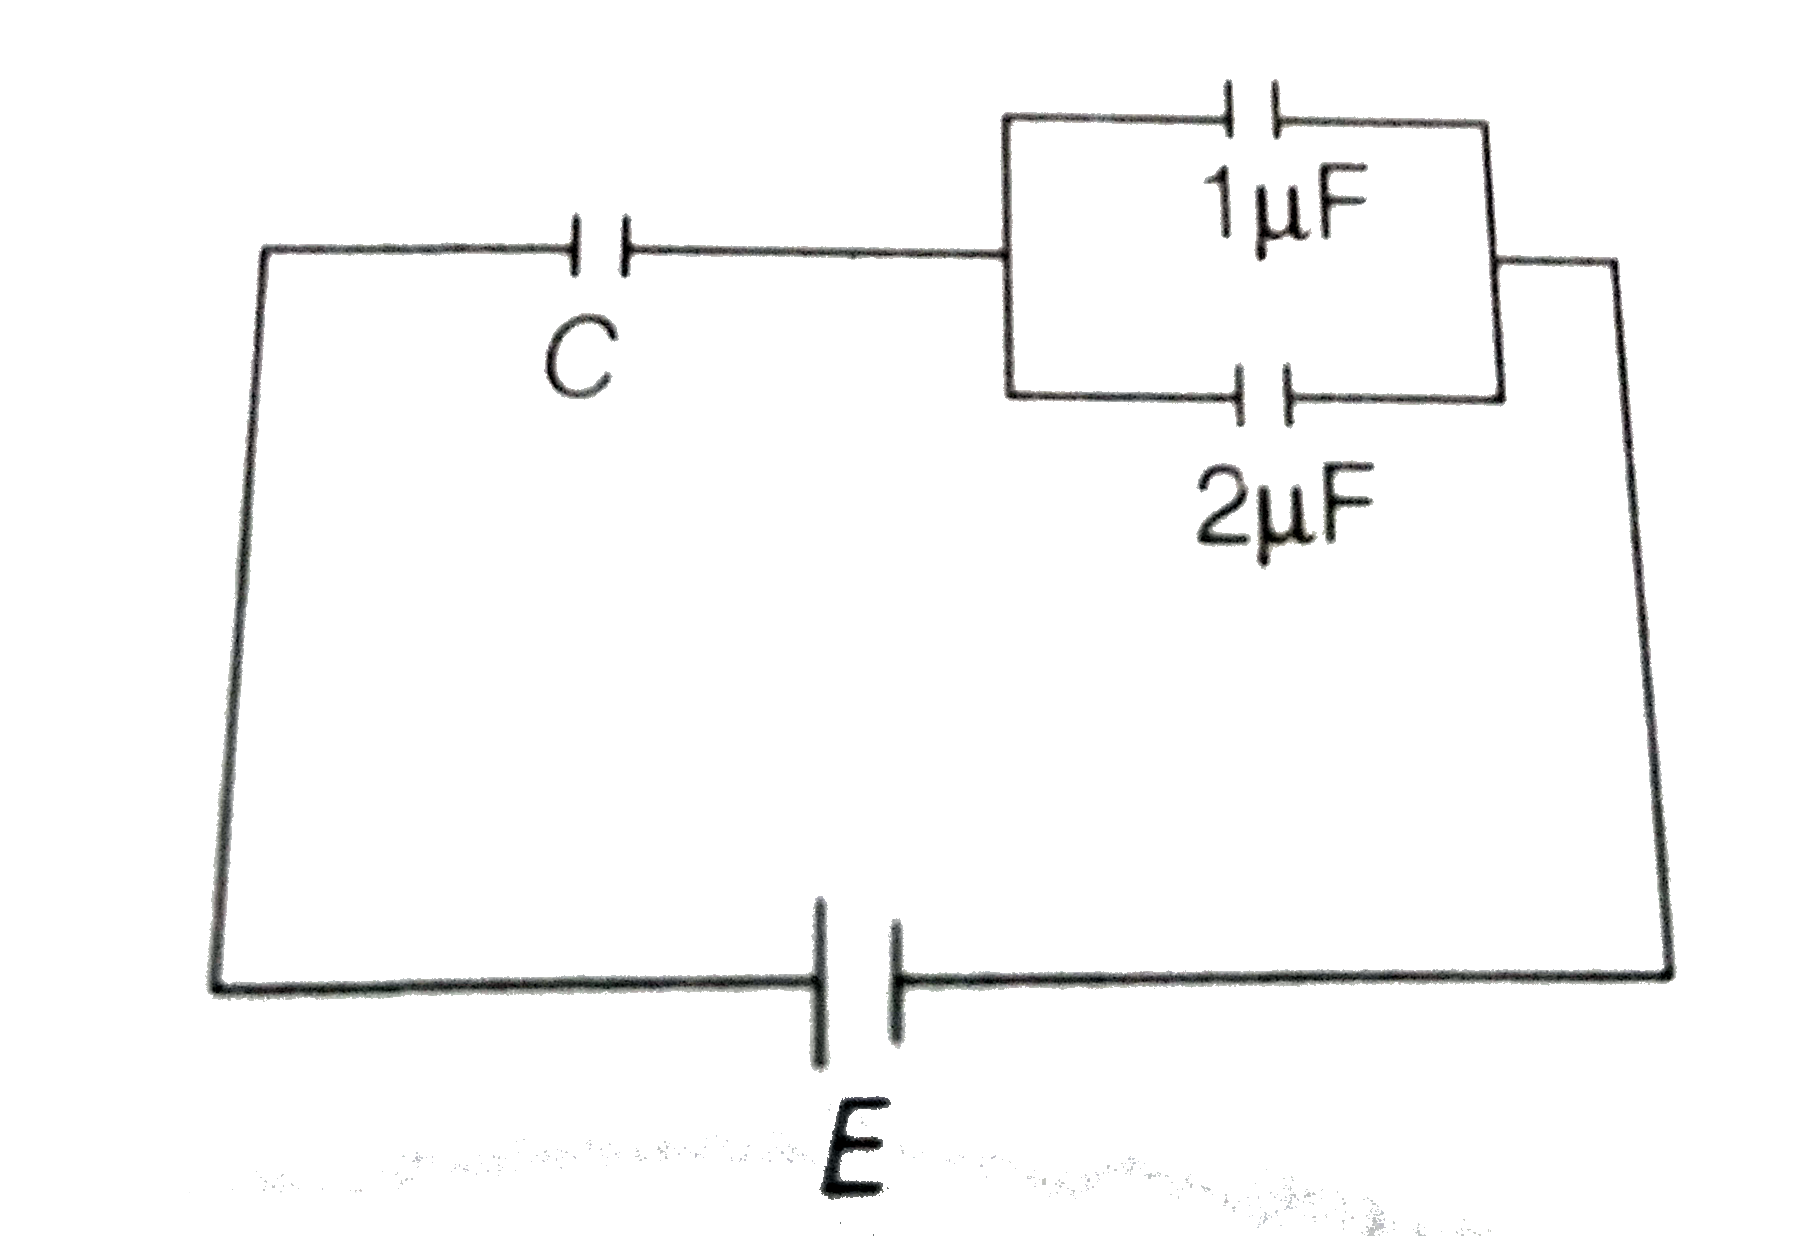 In the given circuit, charge Q(2) on the 2muF capacitor changes as C is varied from 1muF to 3muF. Q(2) as a function of C is given property by (figures are drawn schematically and are not to scale)